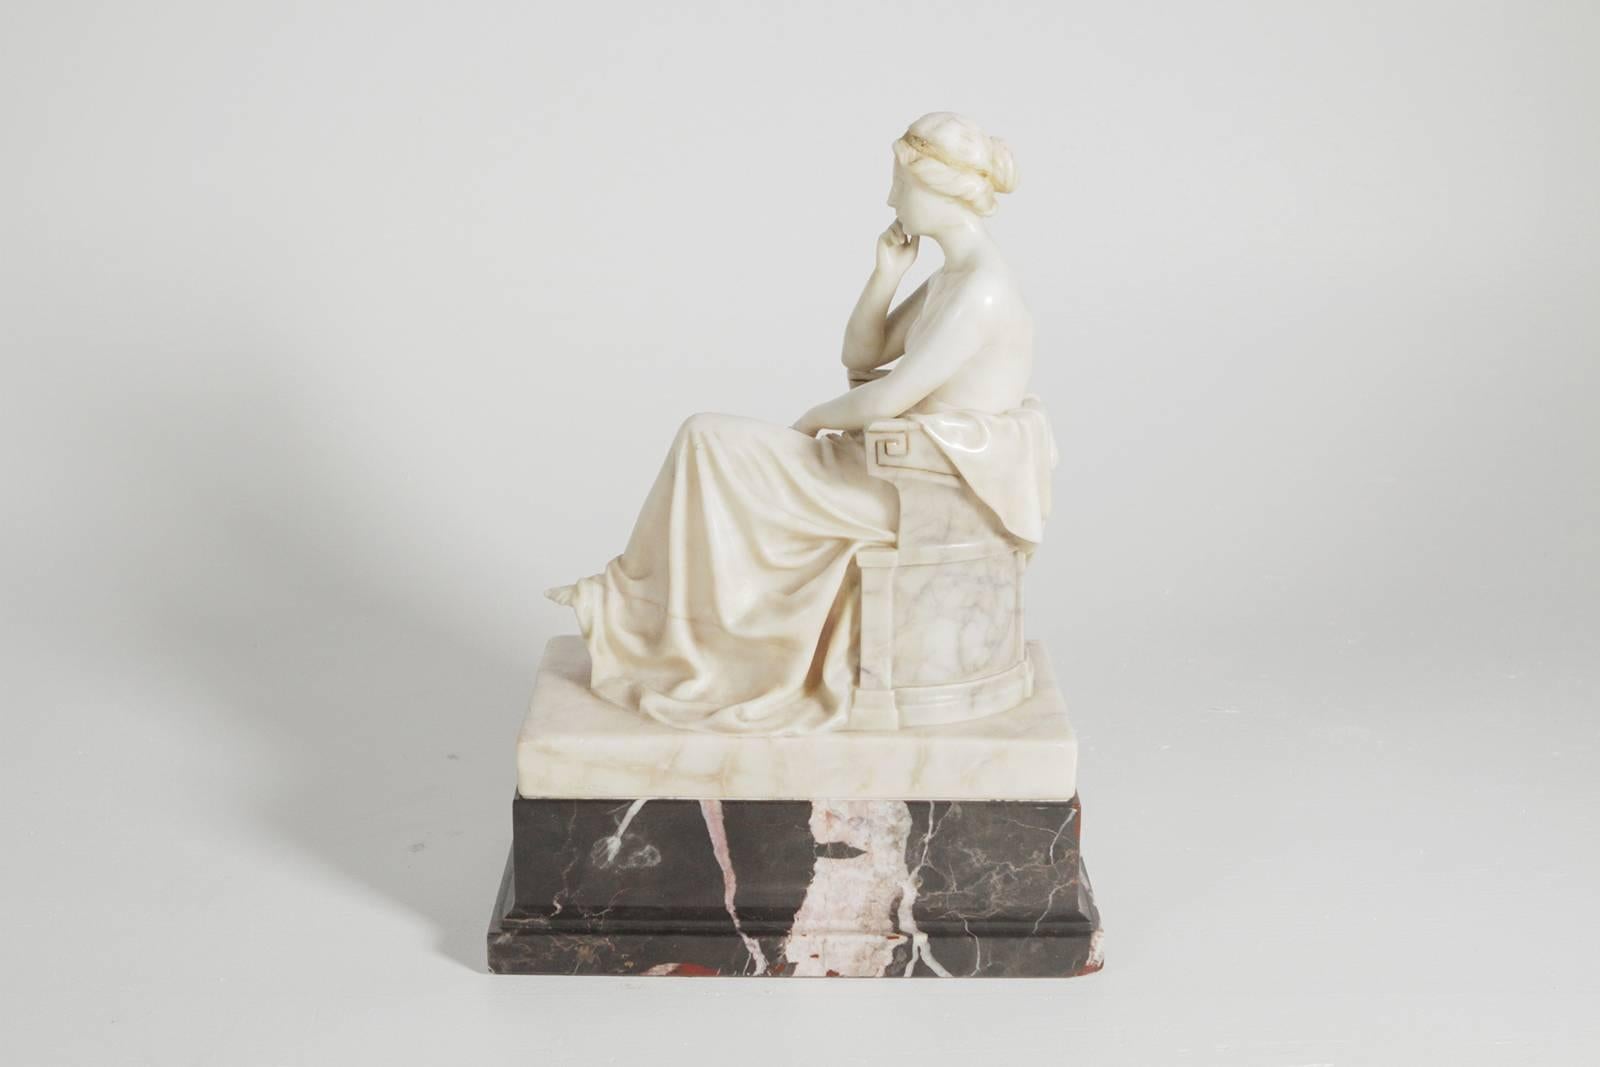 20th Century Neoclassical German Marble and Ormolu Sculpture of a Seated Muse with Harp